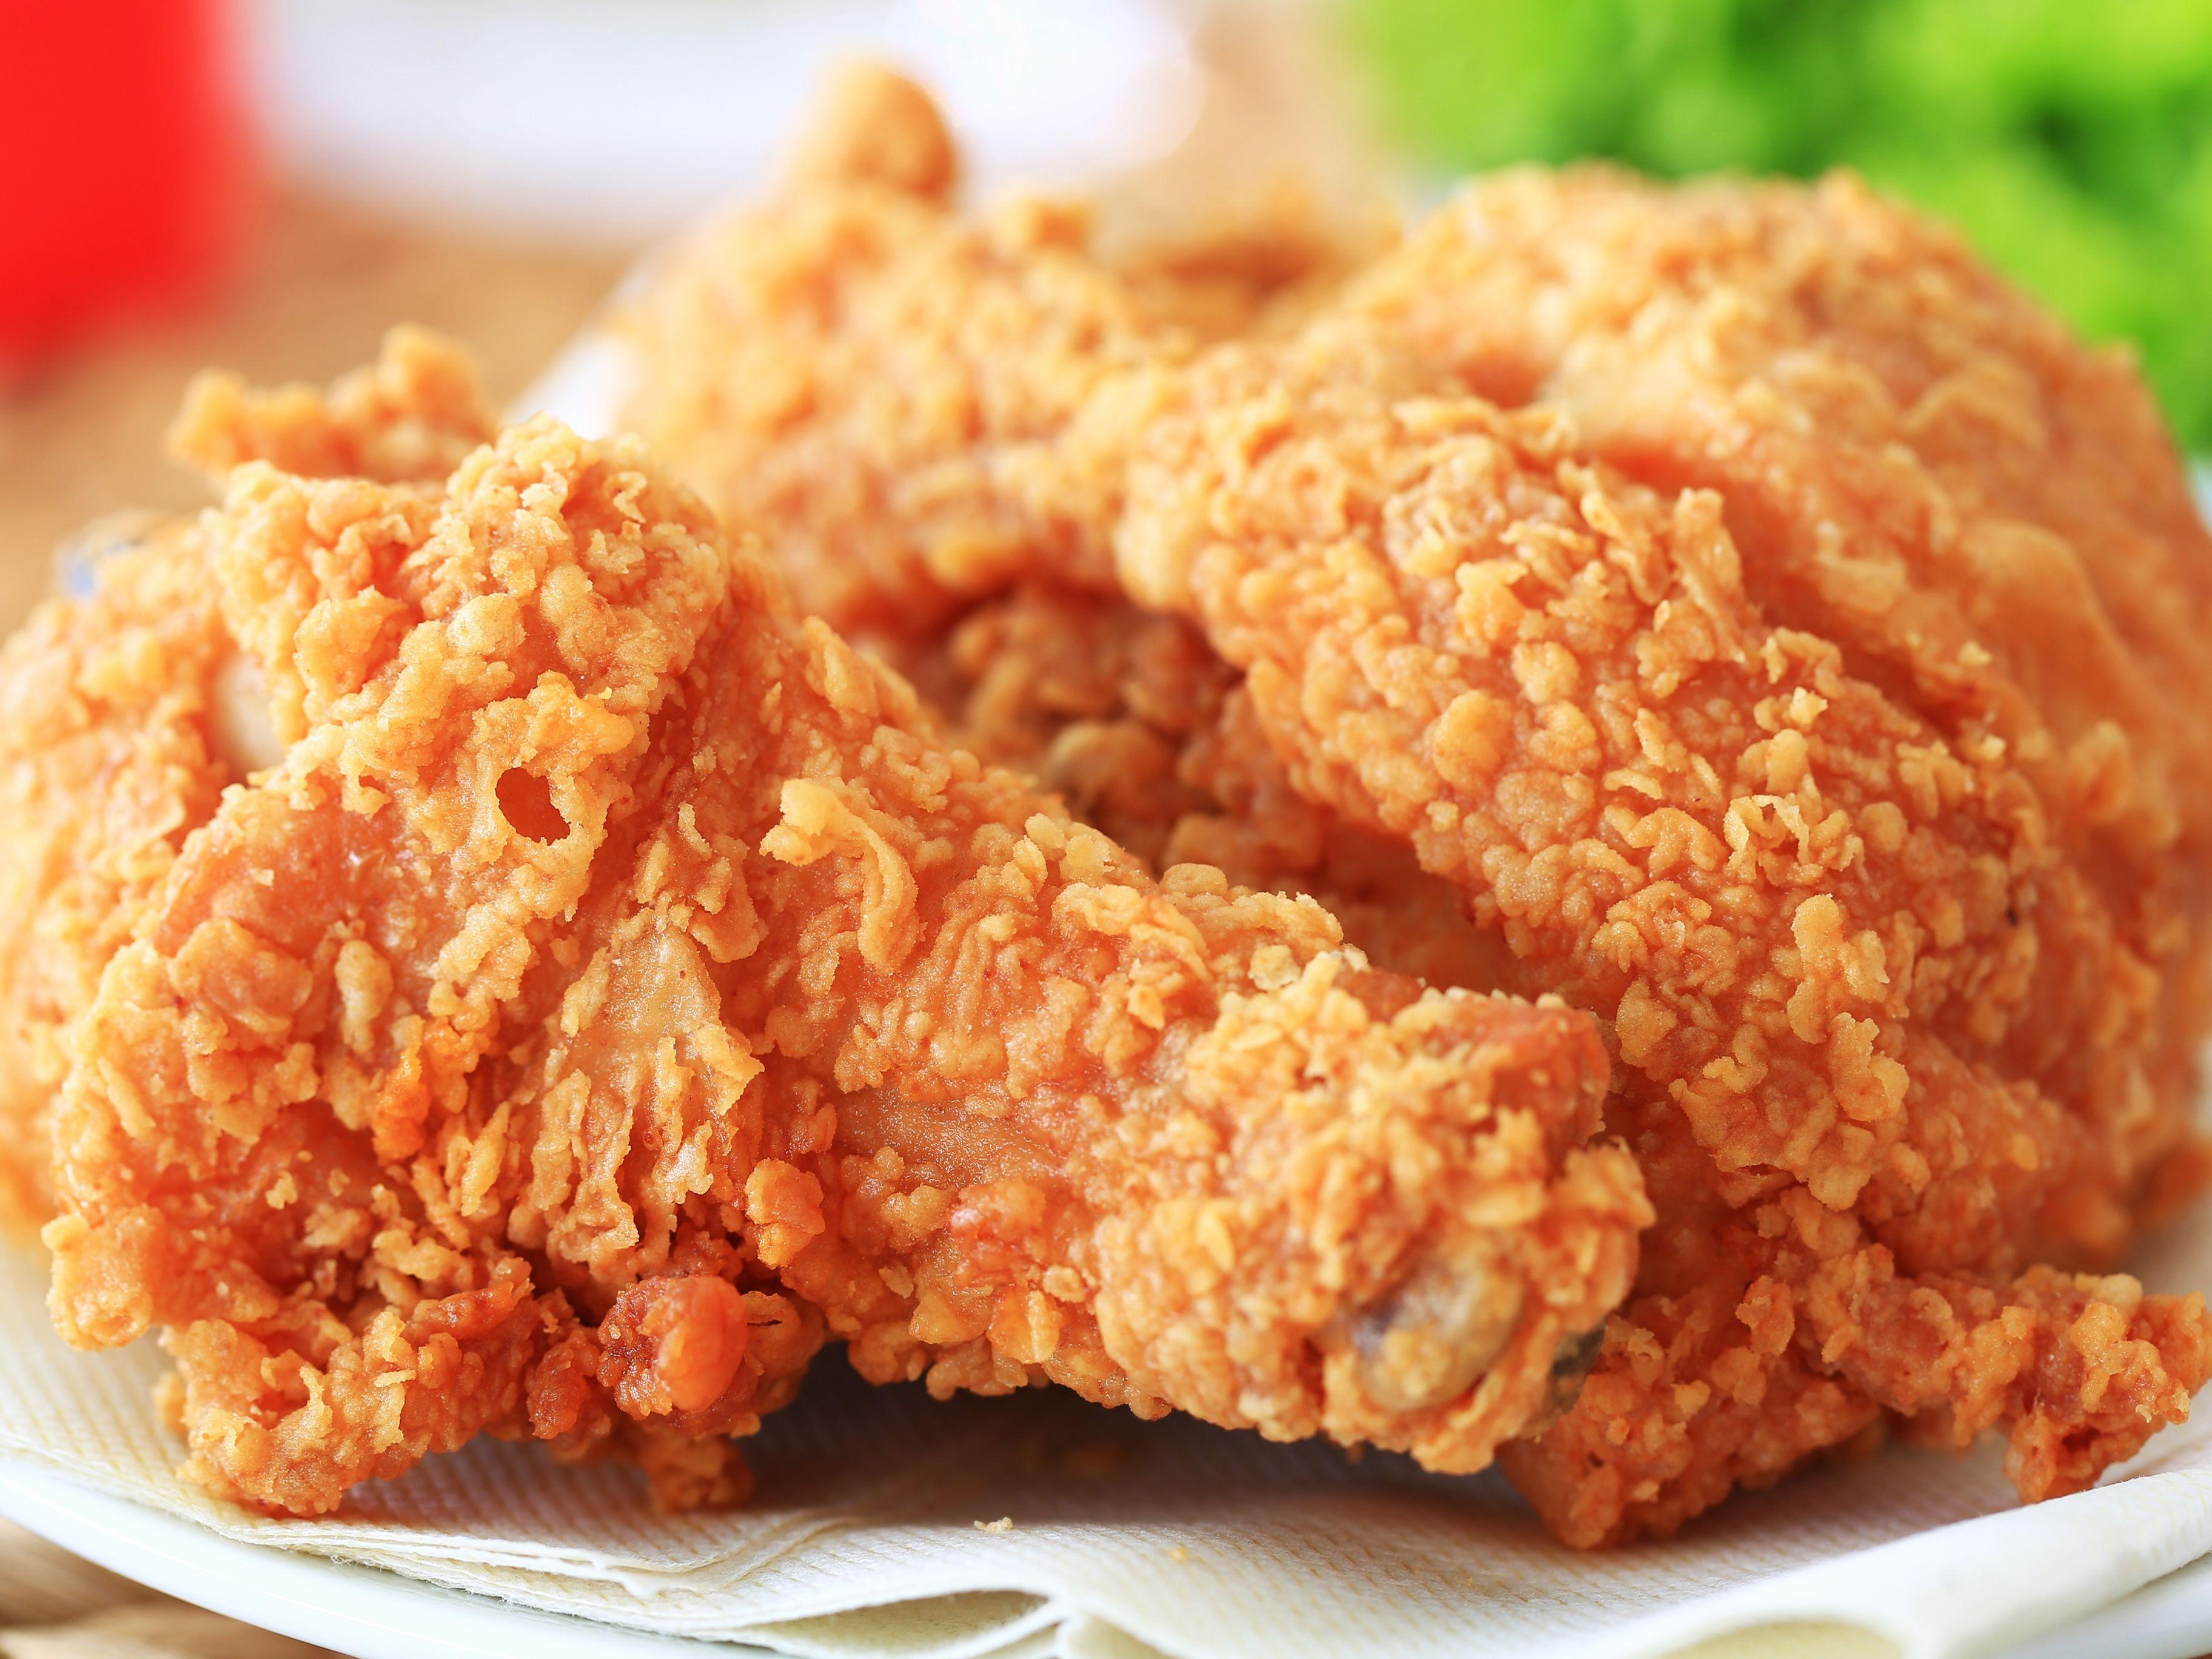 Fried Chicken Wallpapers - Top Free Fried Chicken Backgrounds